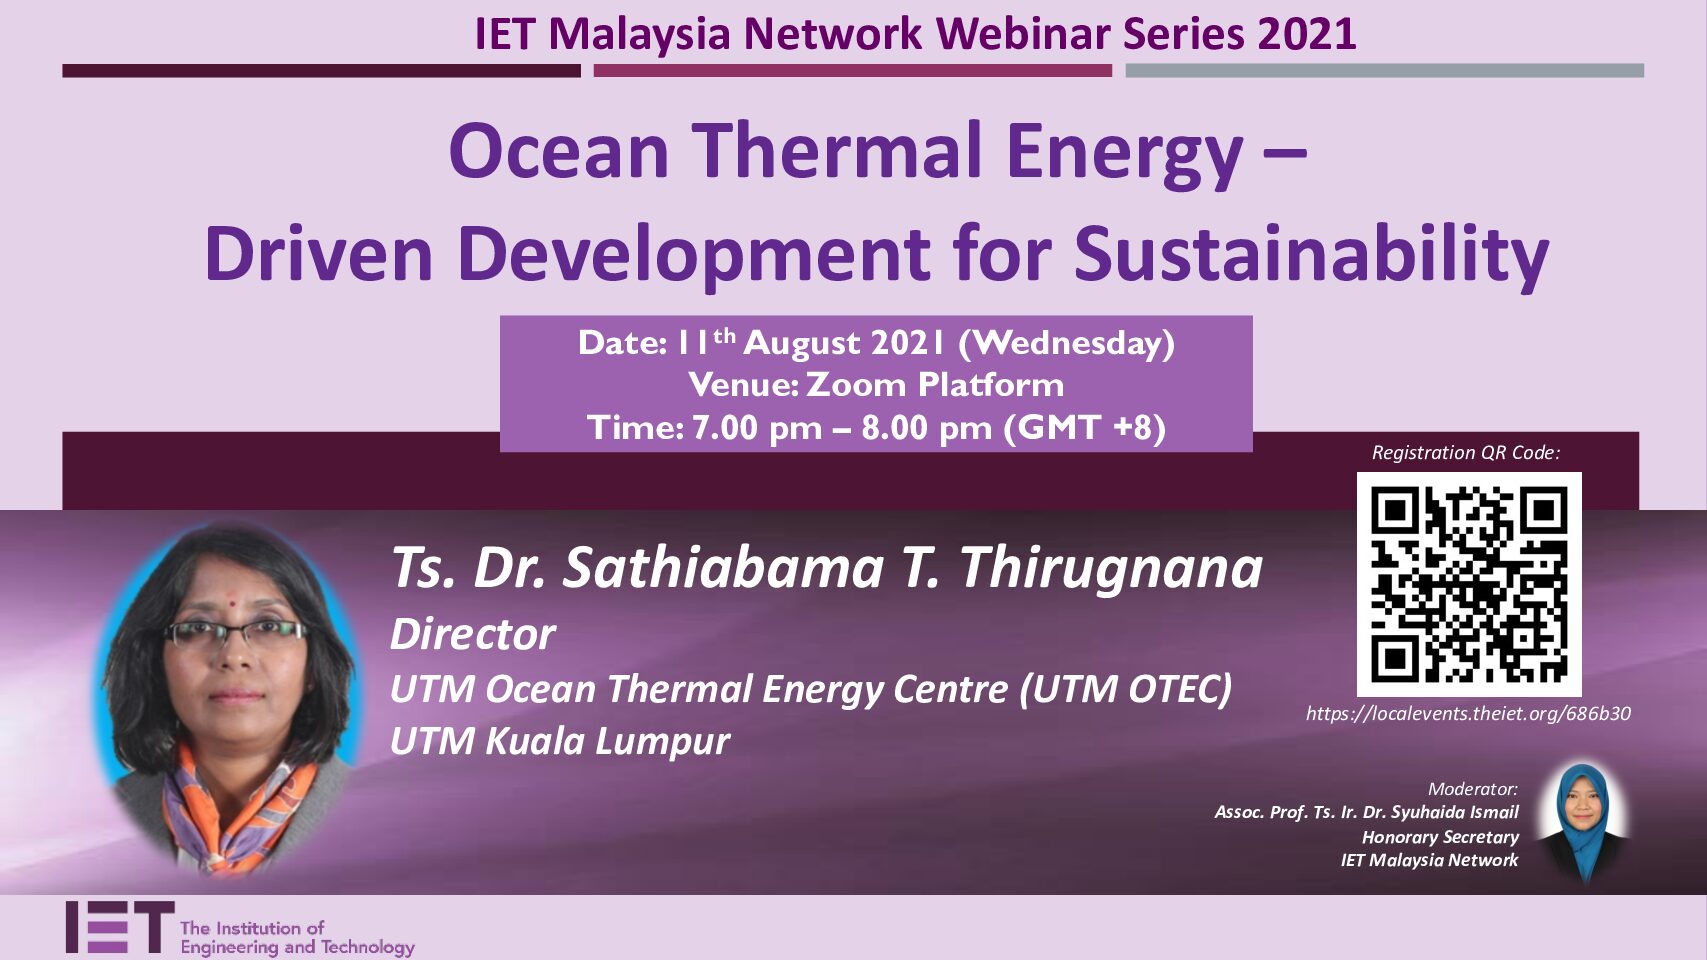 EVENT ANNOUNCEMENT: IET Malaysia LN Webinar Series on “Ocean Thermal Energy – Driven Development for Sustainability”